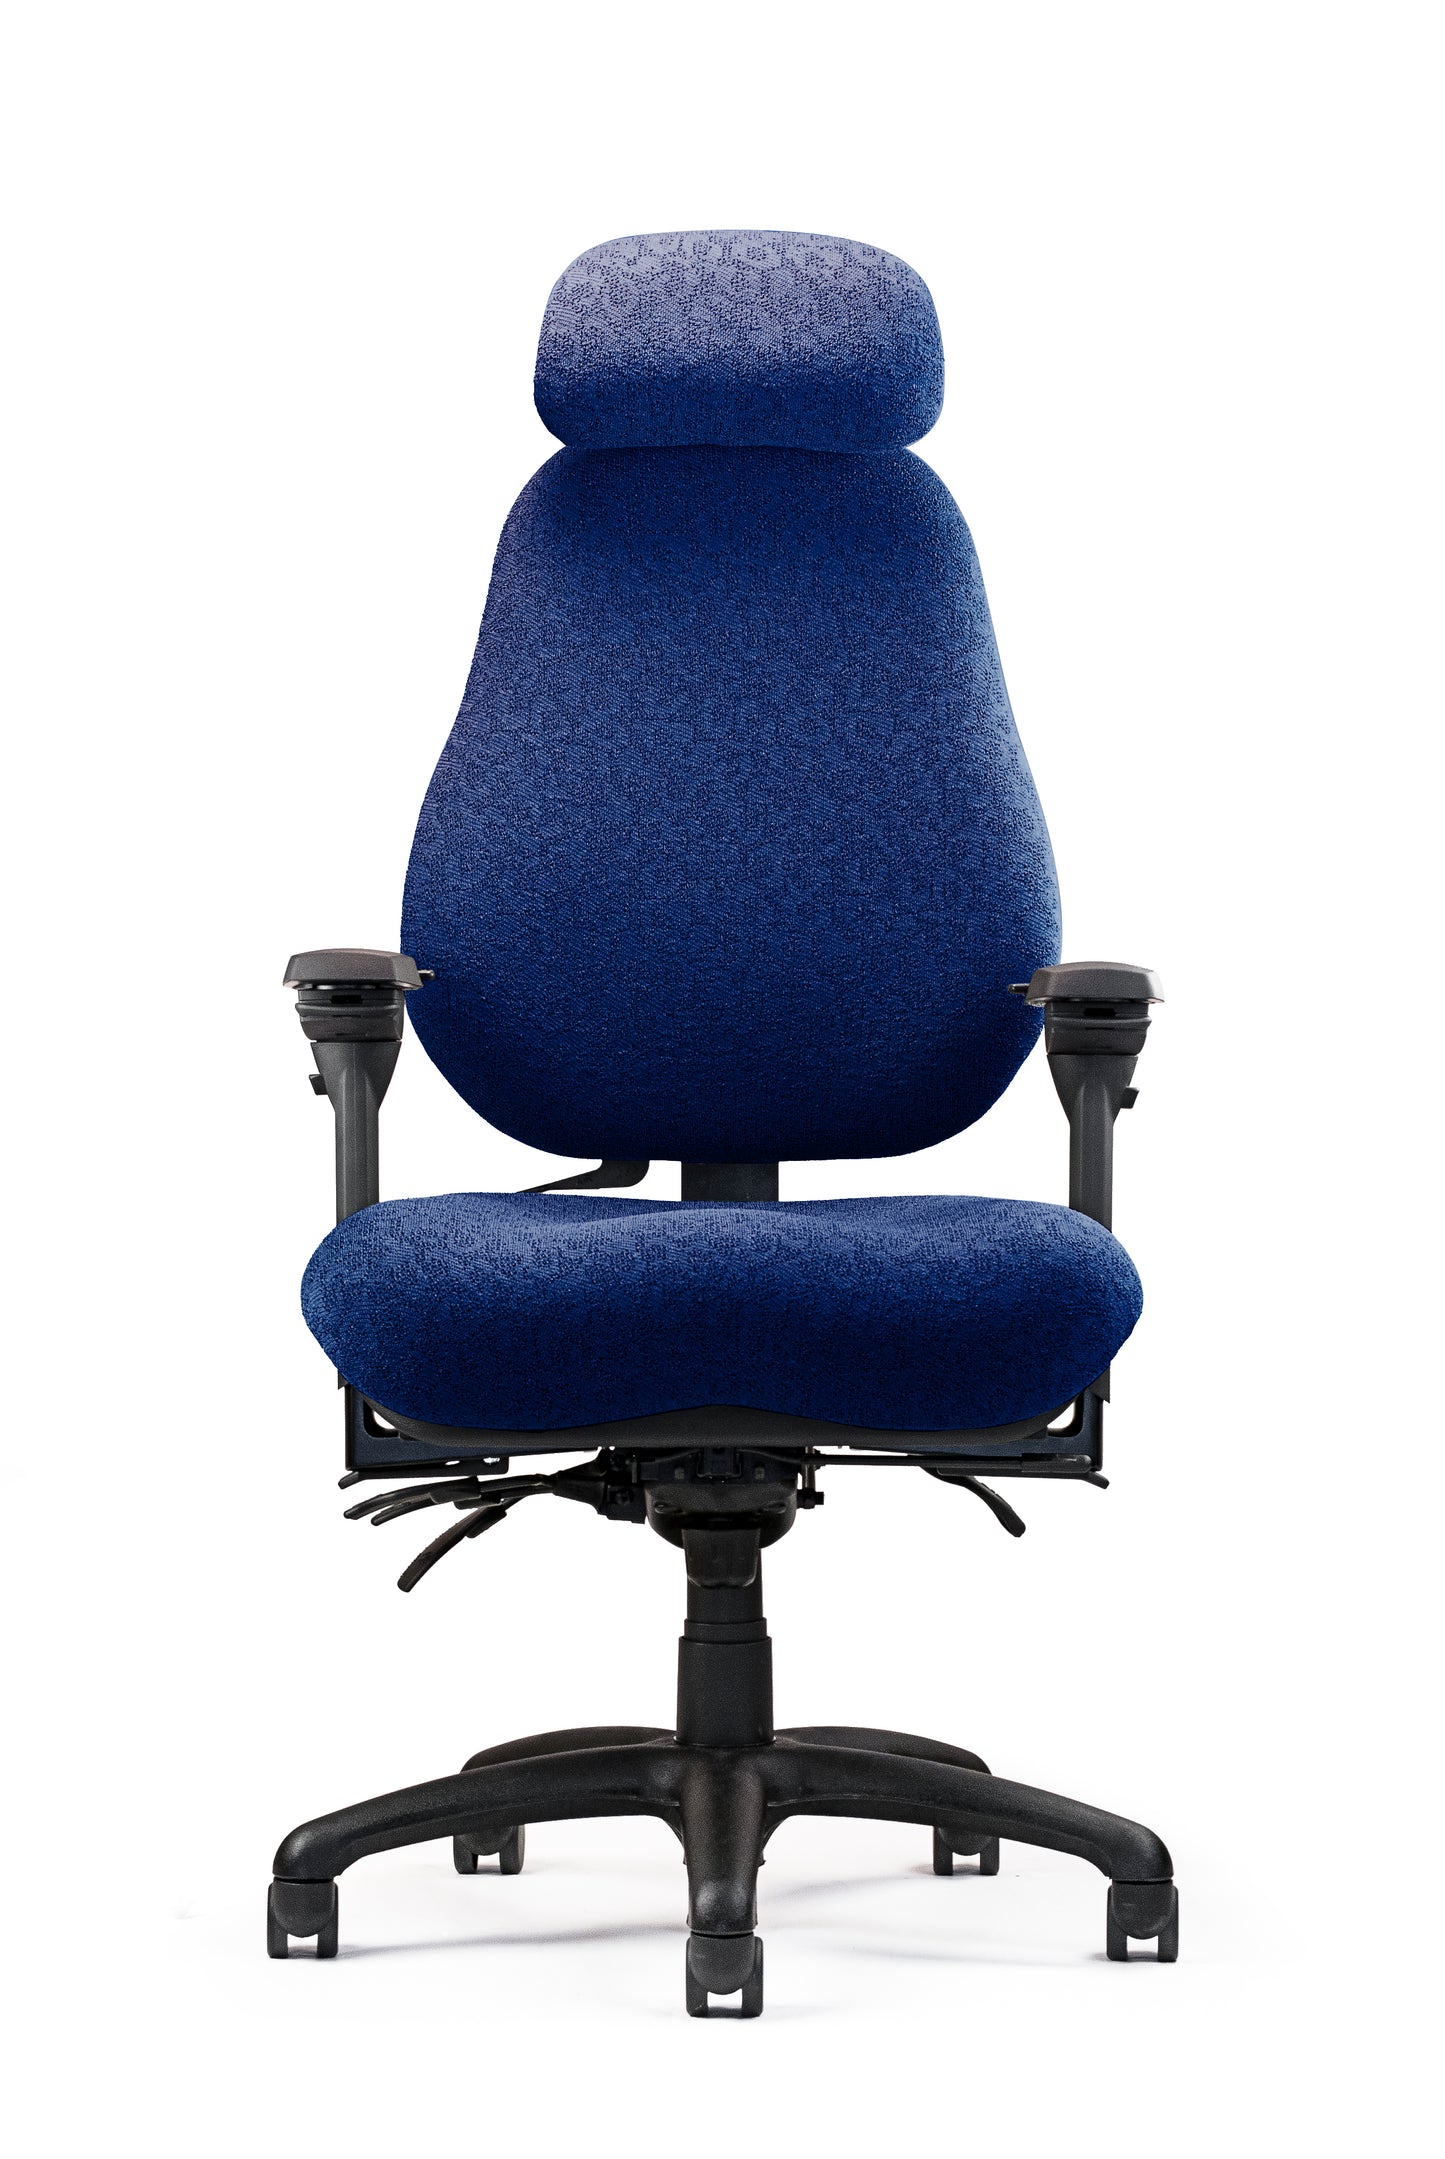 Neutral Posture 8000 Series with Headrest